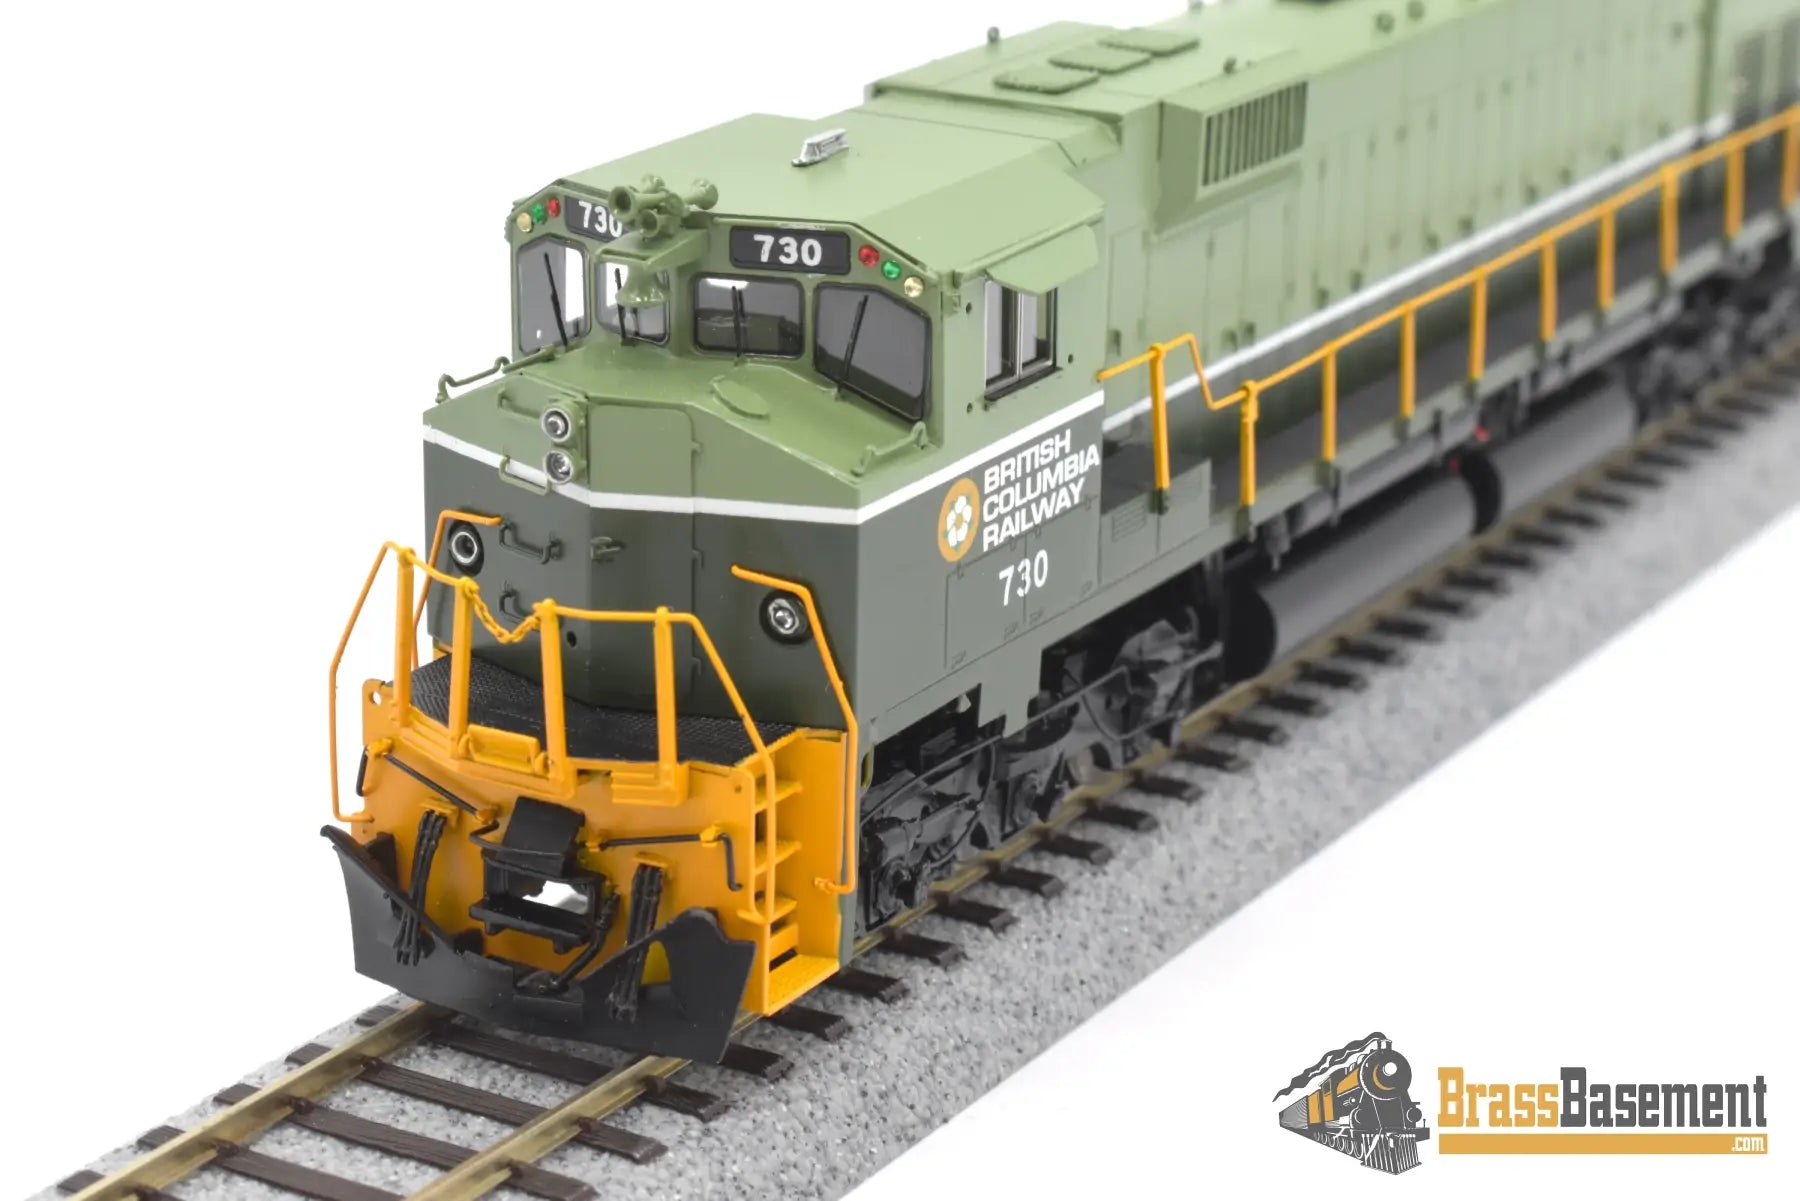 Ho Brass - Omi 6701.1 Bcr British Columbia Railway C630 Wide Nose #730 F/P Two - Tone Green Diesel